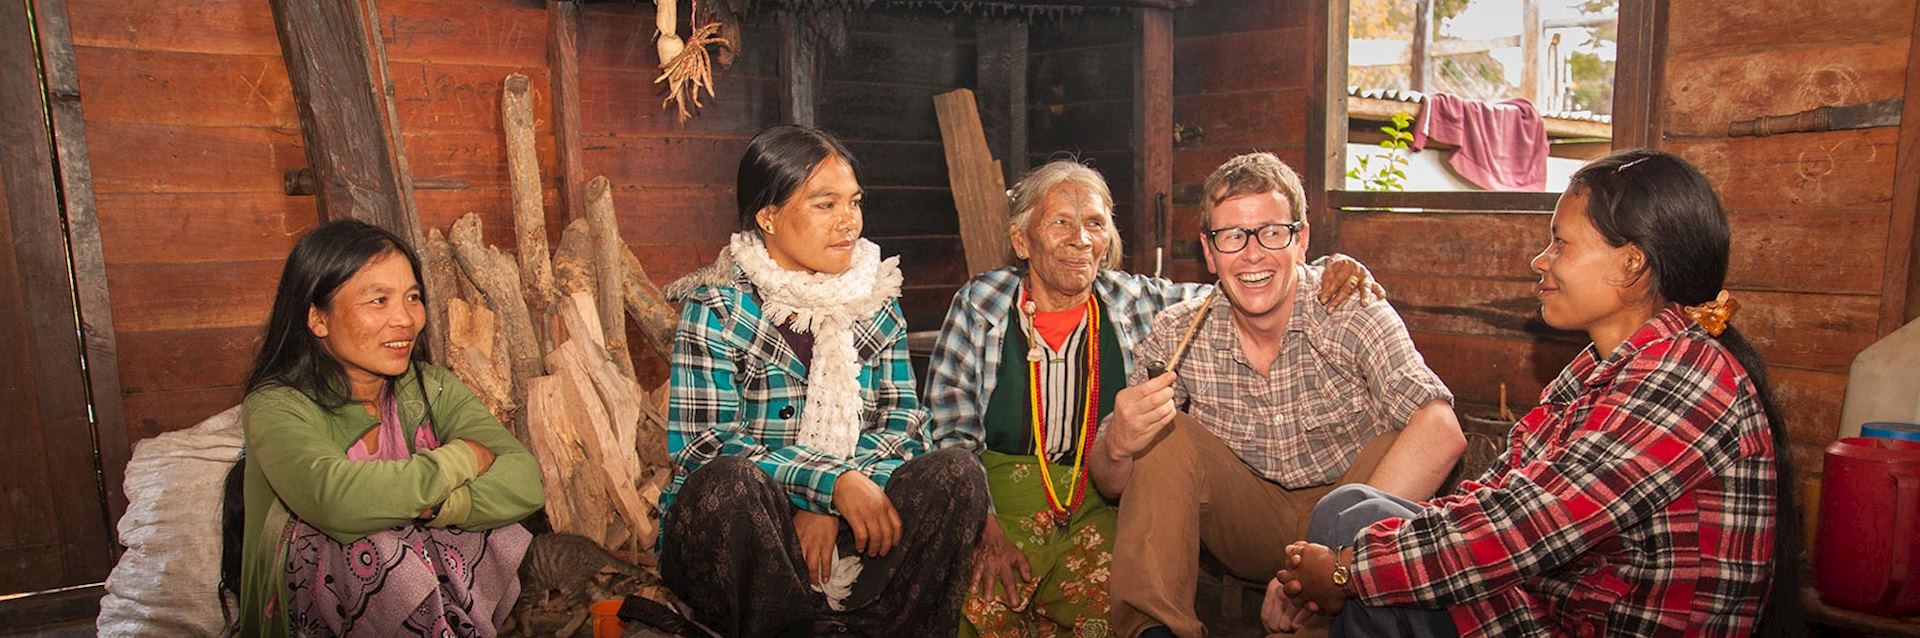 Specialist Mark with members of the Muun tribe in Myanmar